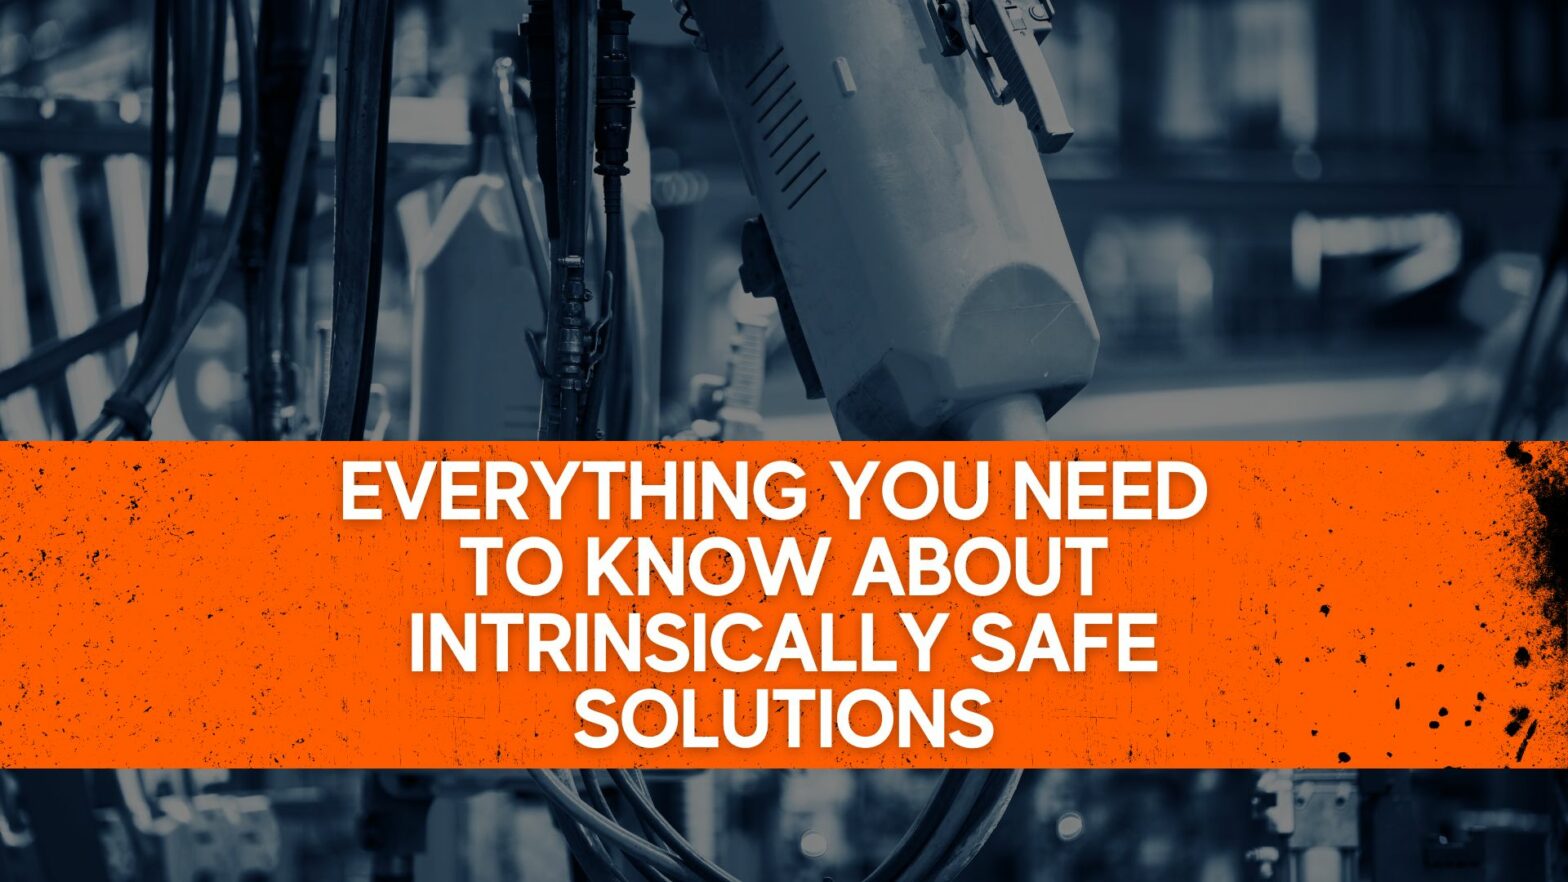 Everything you need to know about intrinsically safe solutions